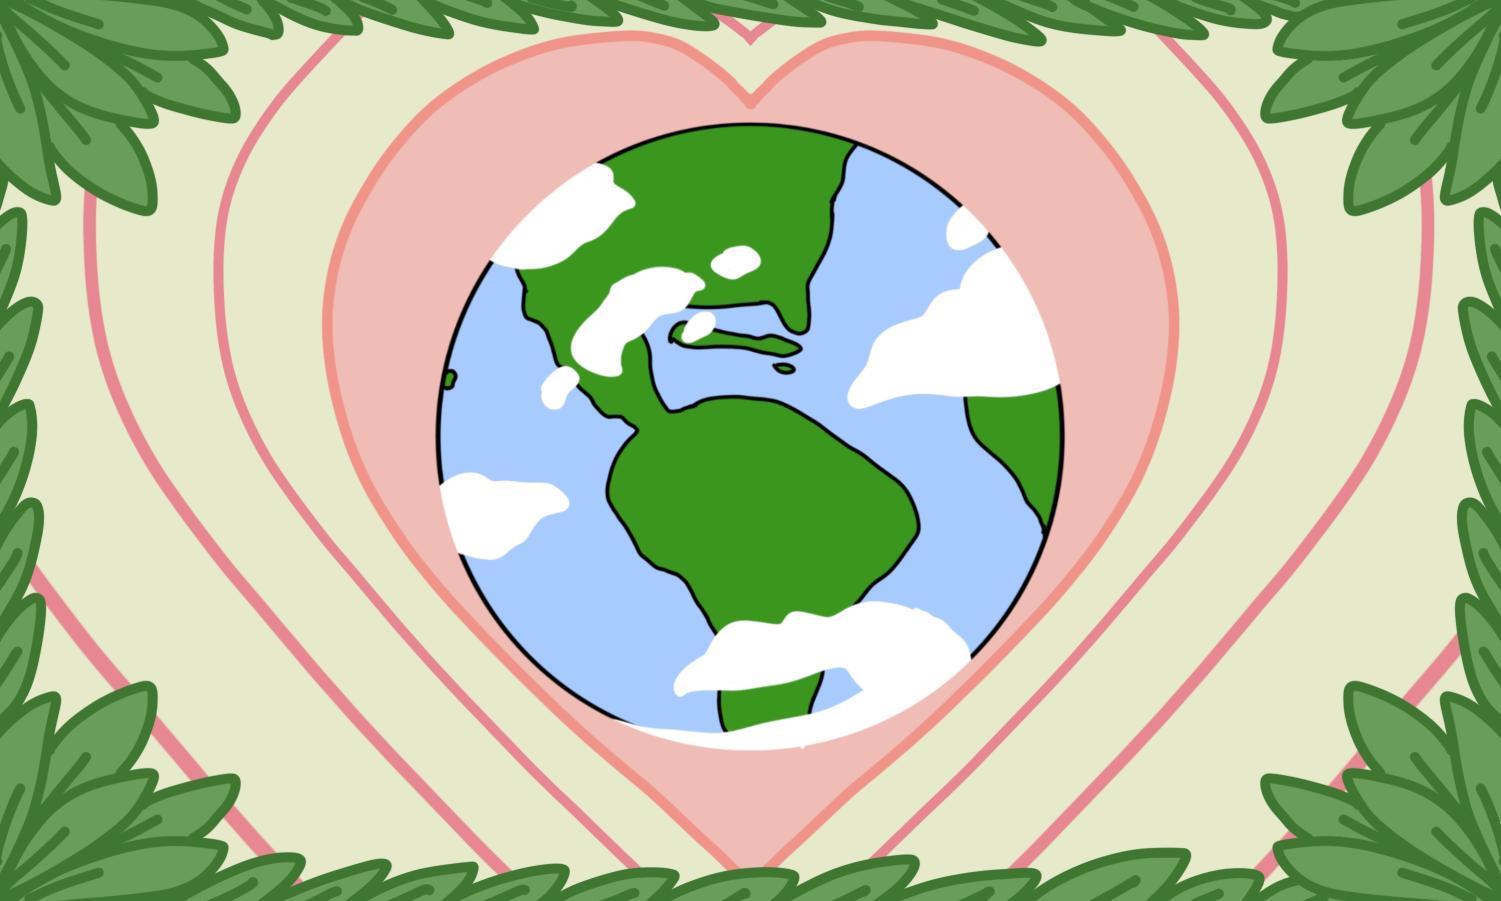 A+drawing+of+a+globe+with+clouds+is+surrounded+by+a+pink+heart.+The+illustration+is+framed+with+drawings+of+leaves.